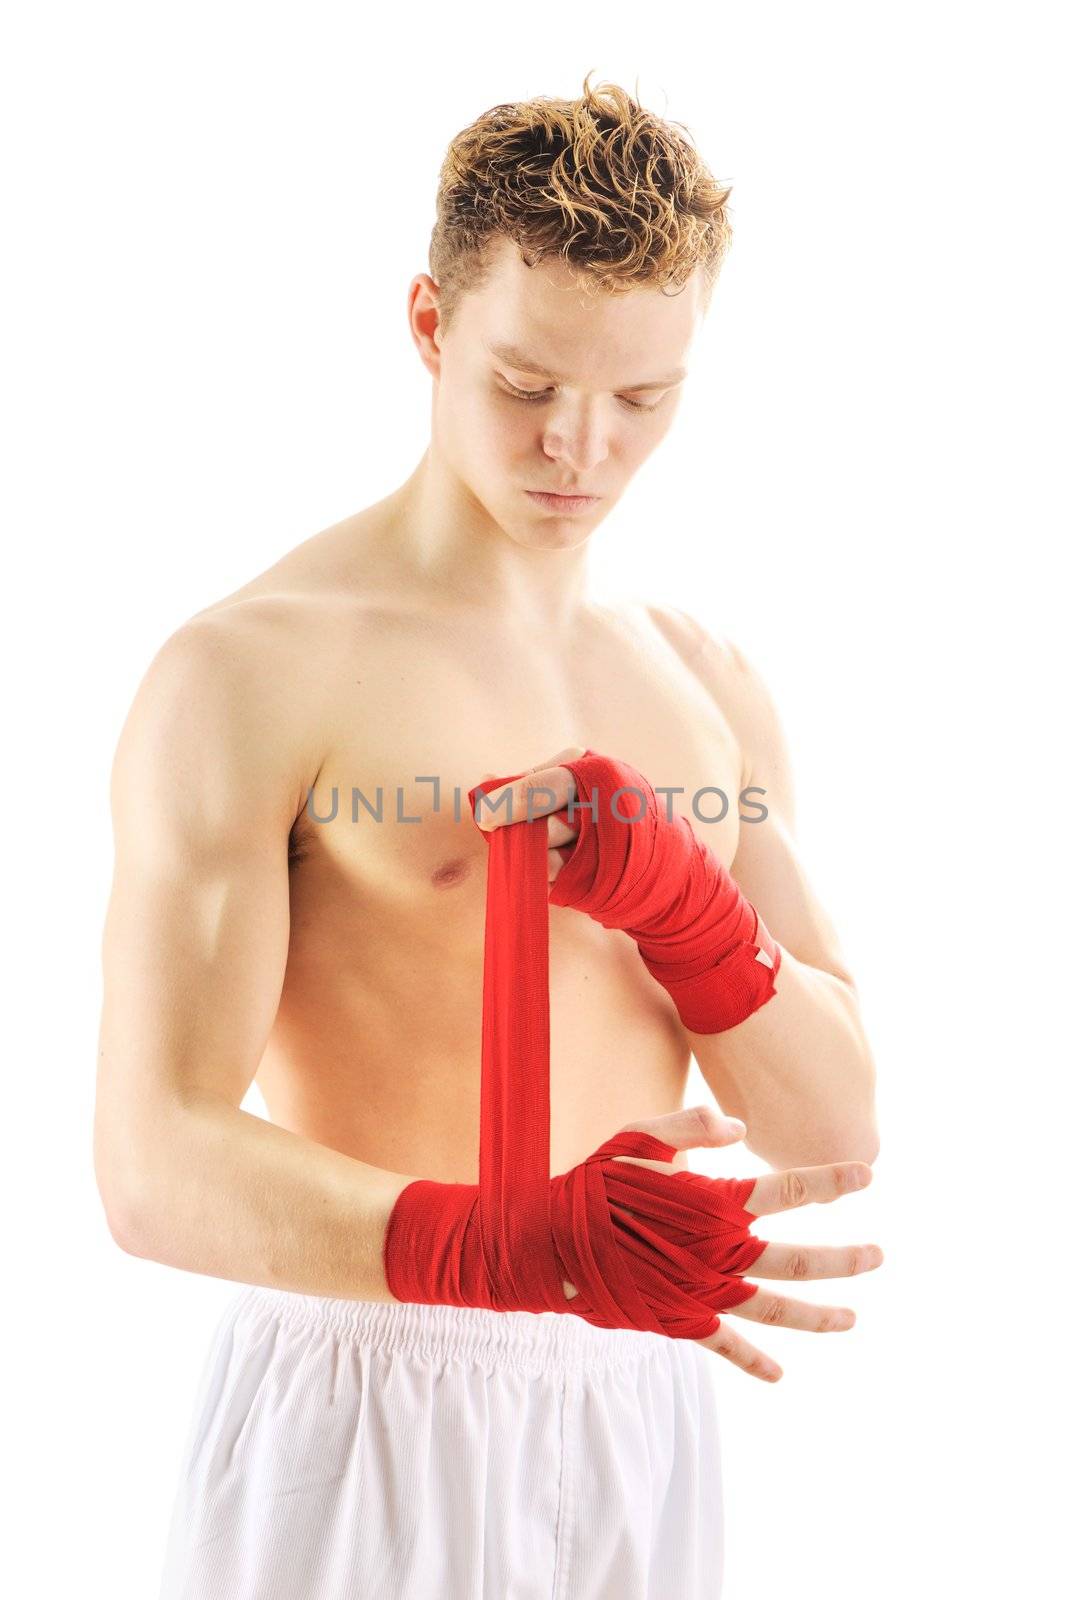 Young man getting ready to fight